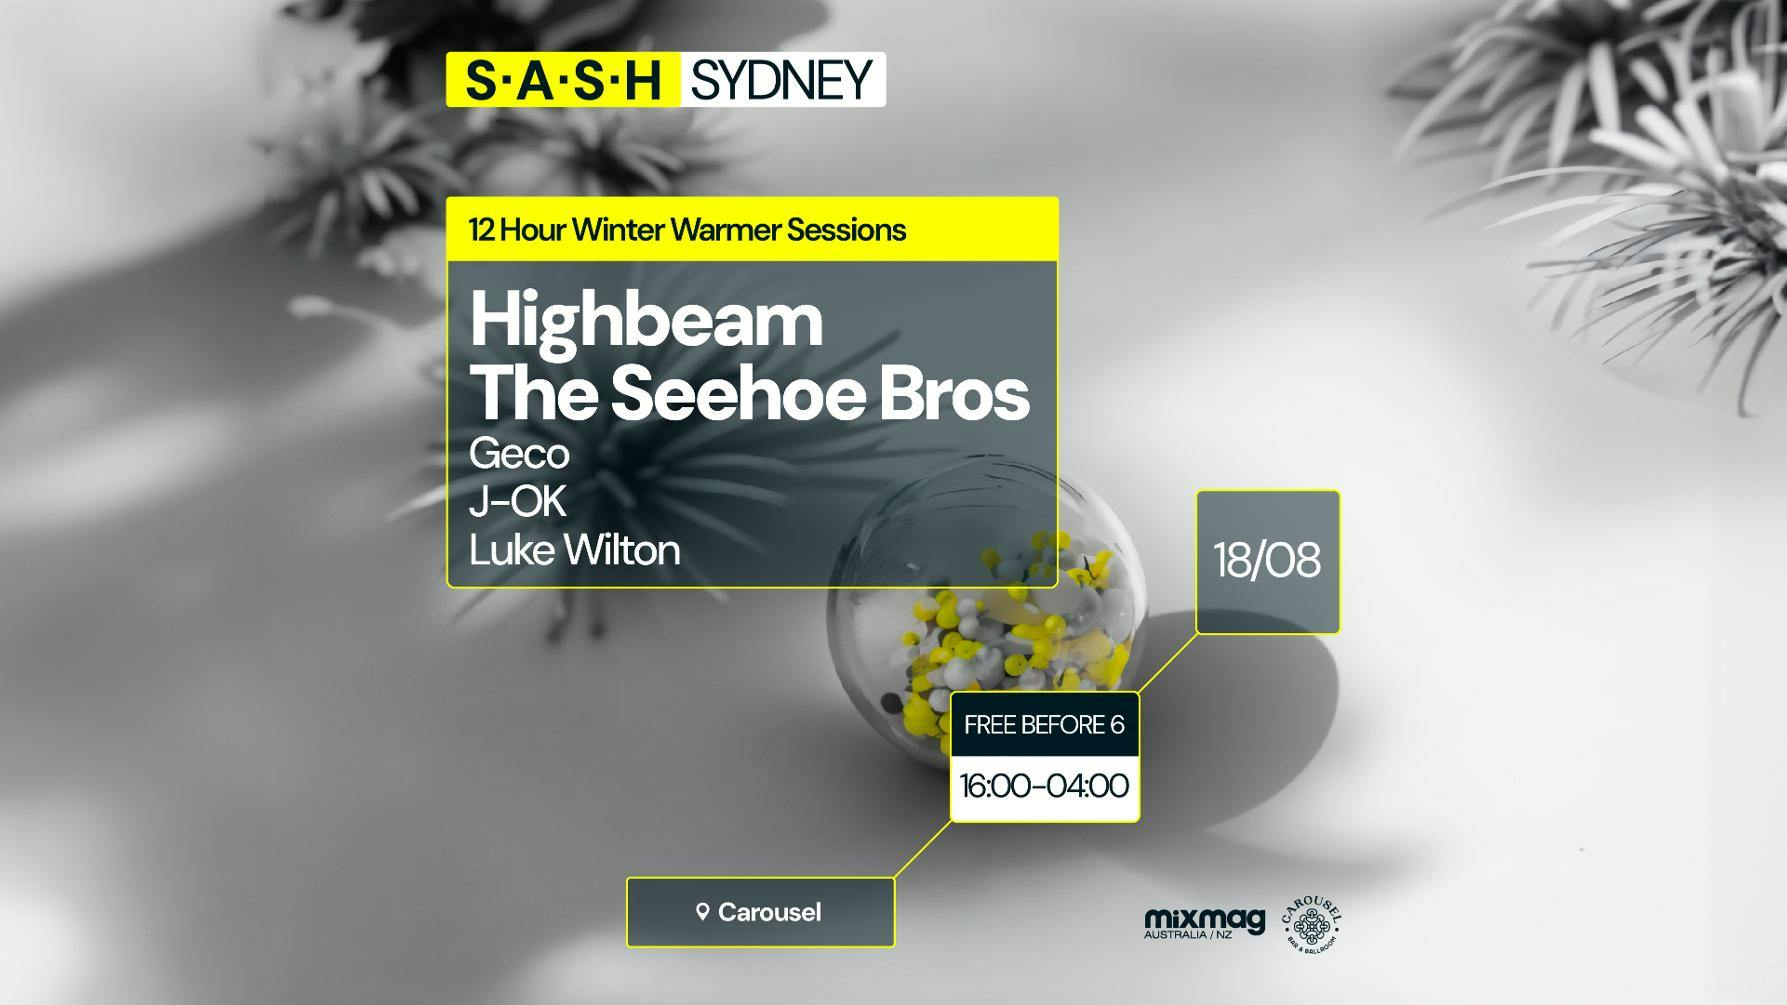 ★ S.A.S.H Sydney ★ Winter Warmer Sessions ★ Highbeam & The Seehoe Brothers ★ Sun 18th August ★